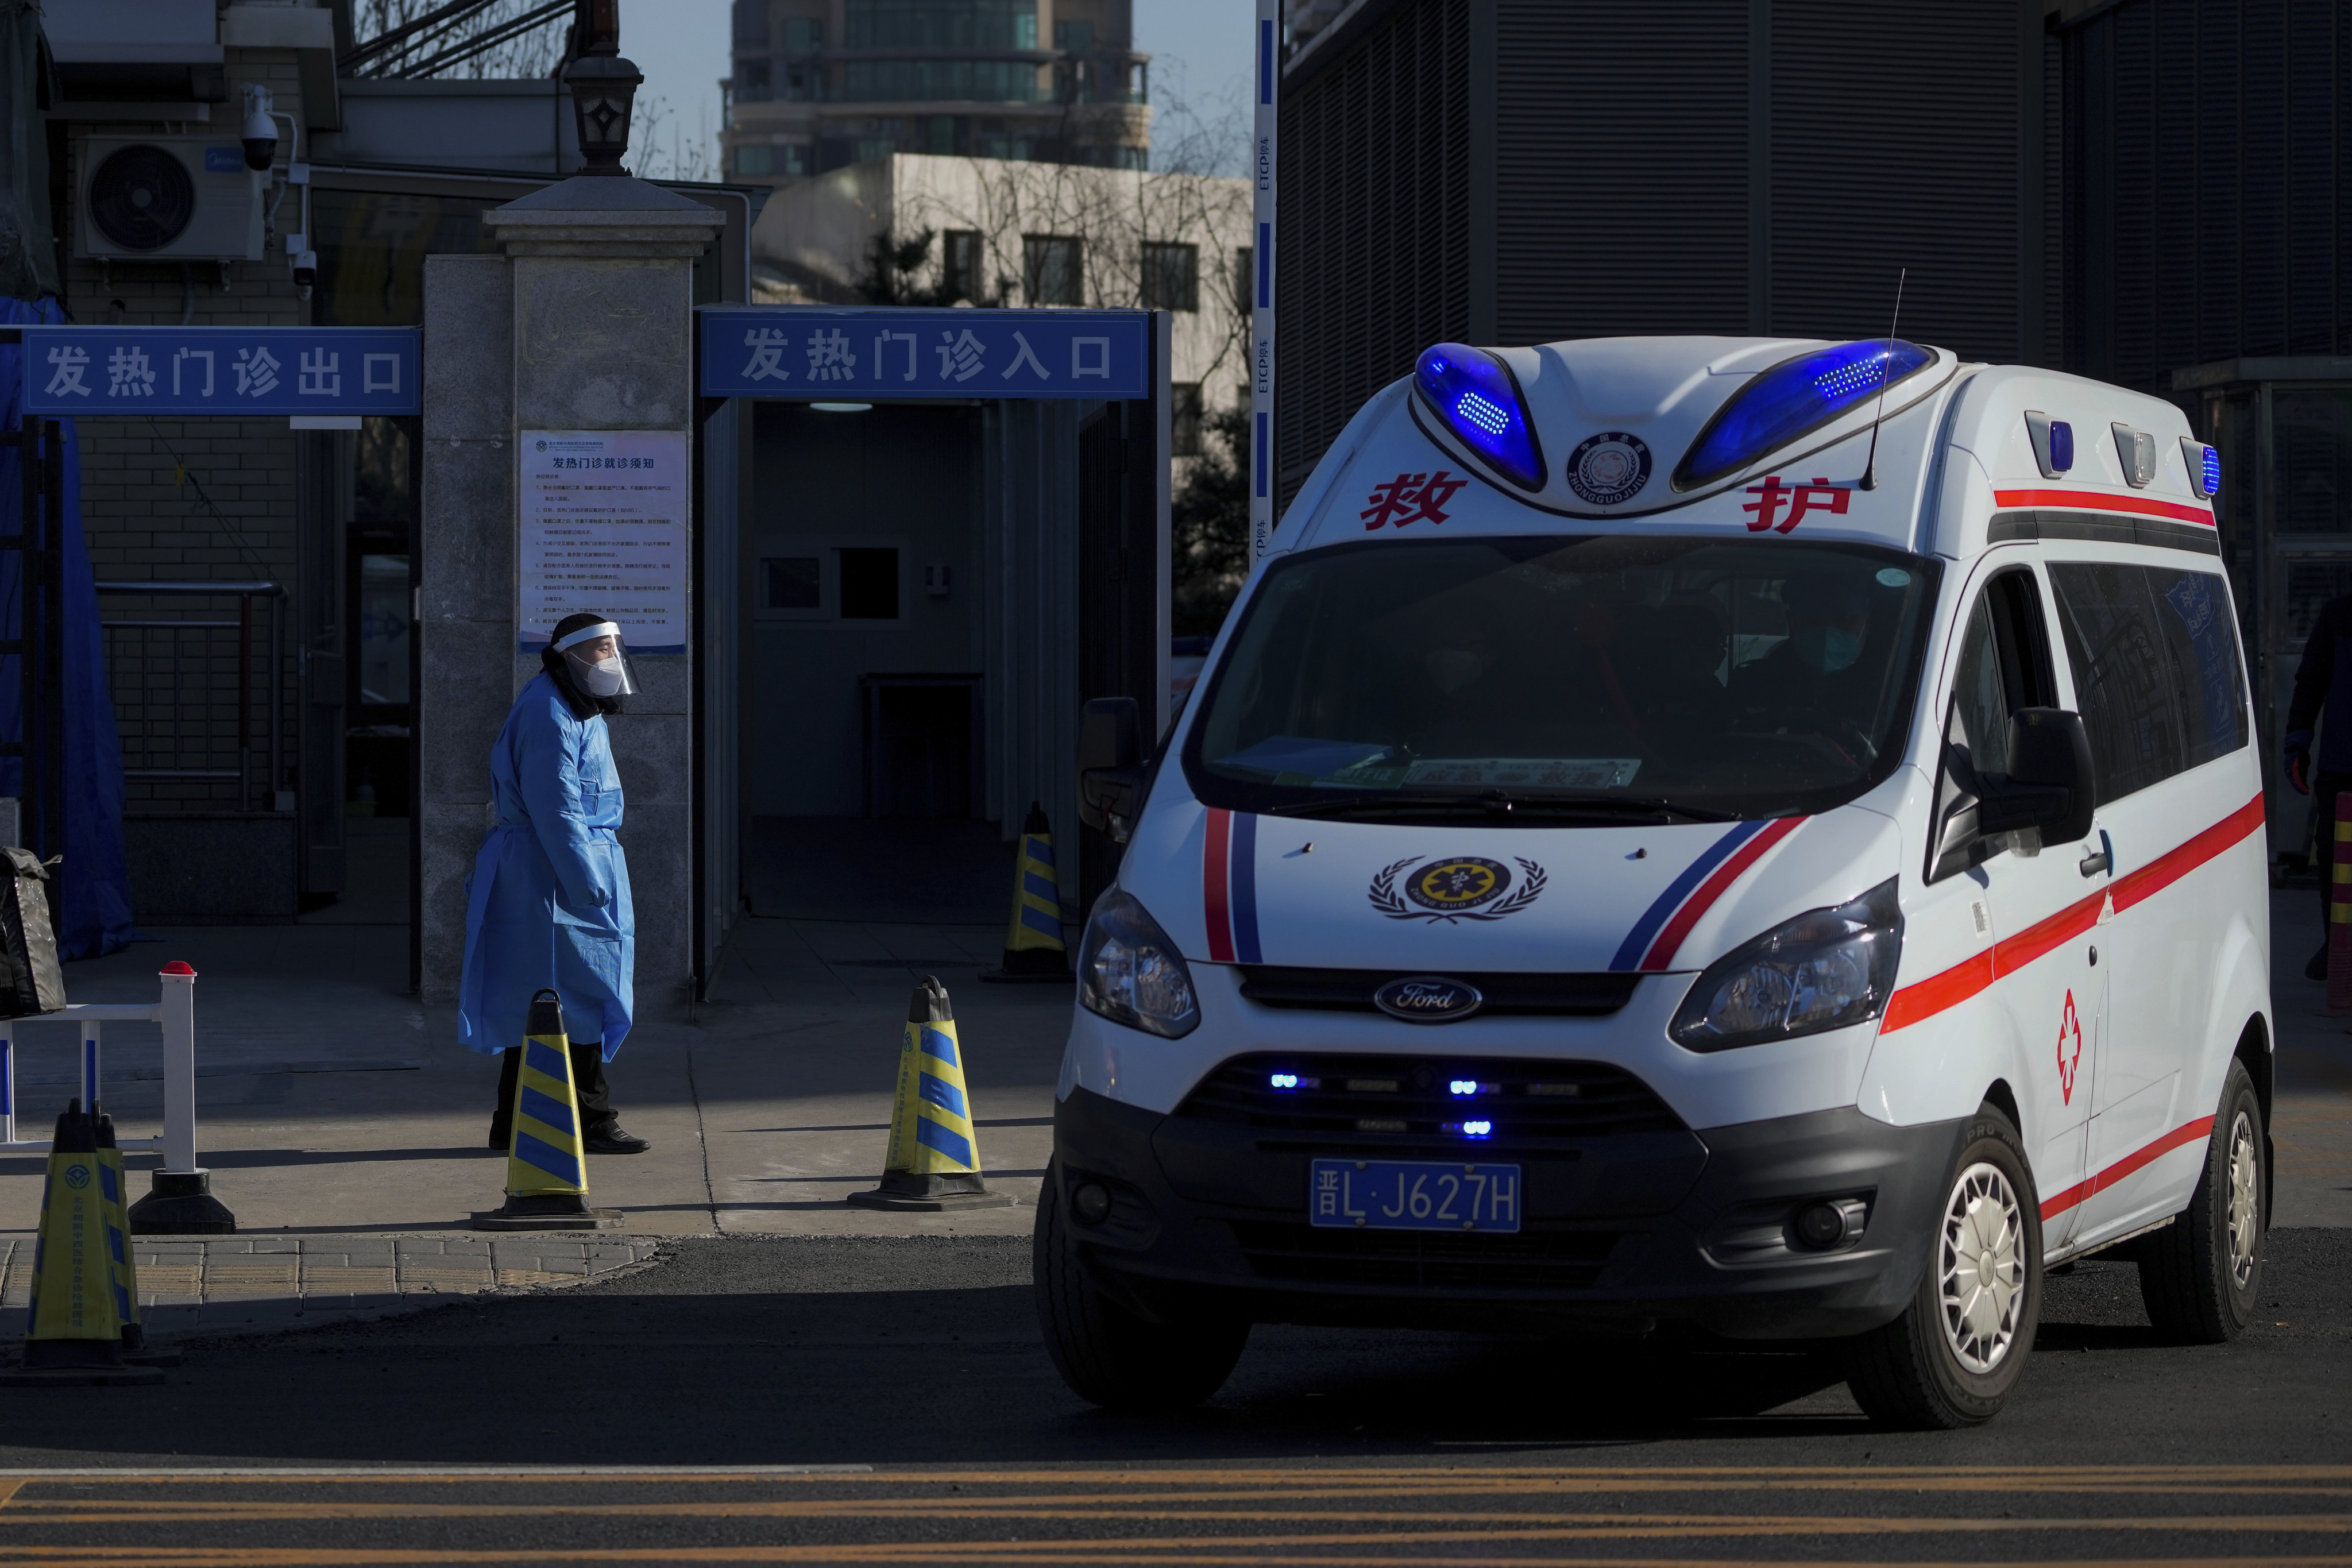 An ambulance outside a fever clinic in Beijing on Monday. China has reported the first Covid-related deaths in weeks amid a surge in cases. Photo: AP